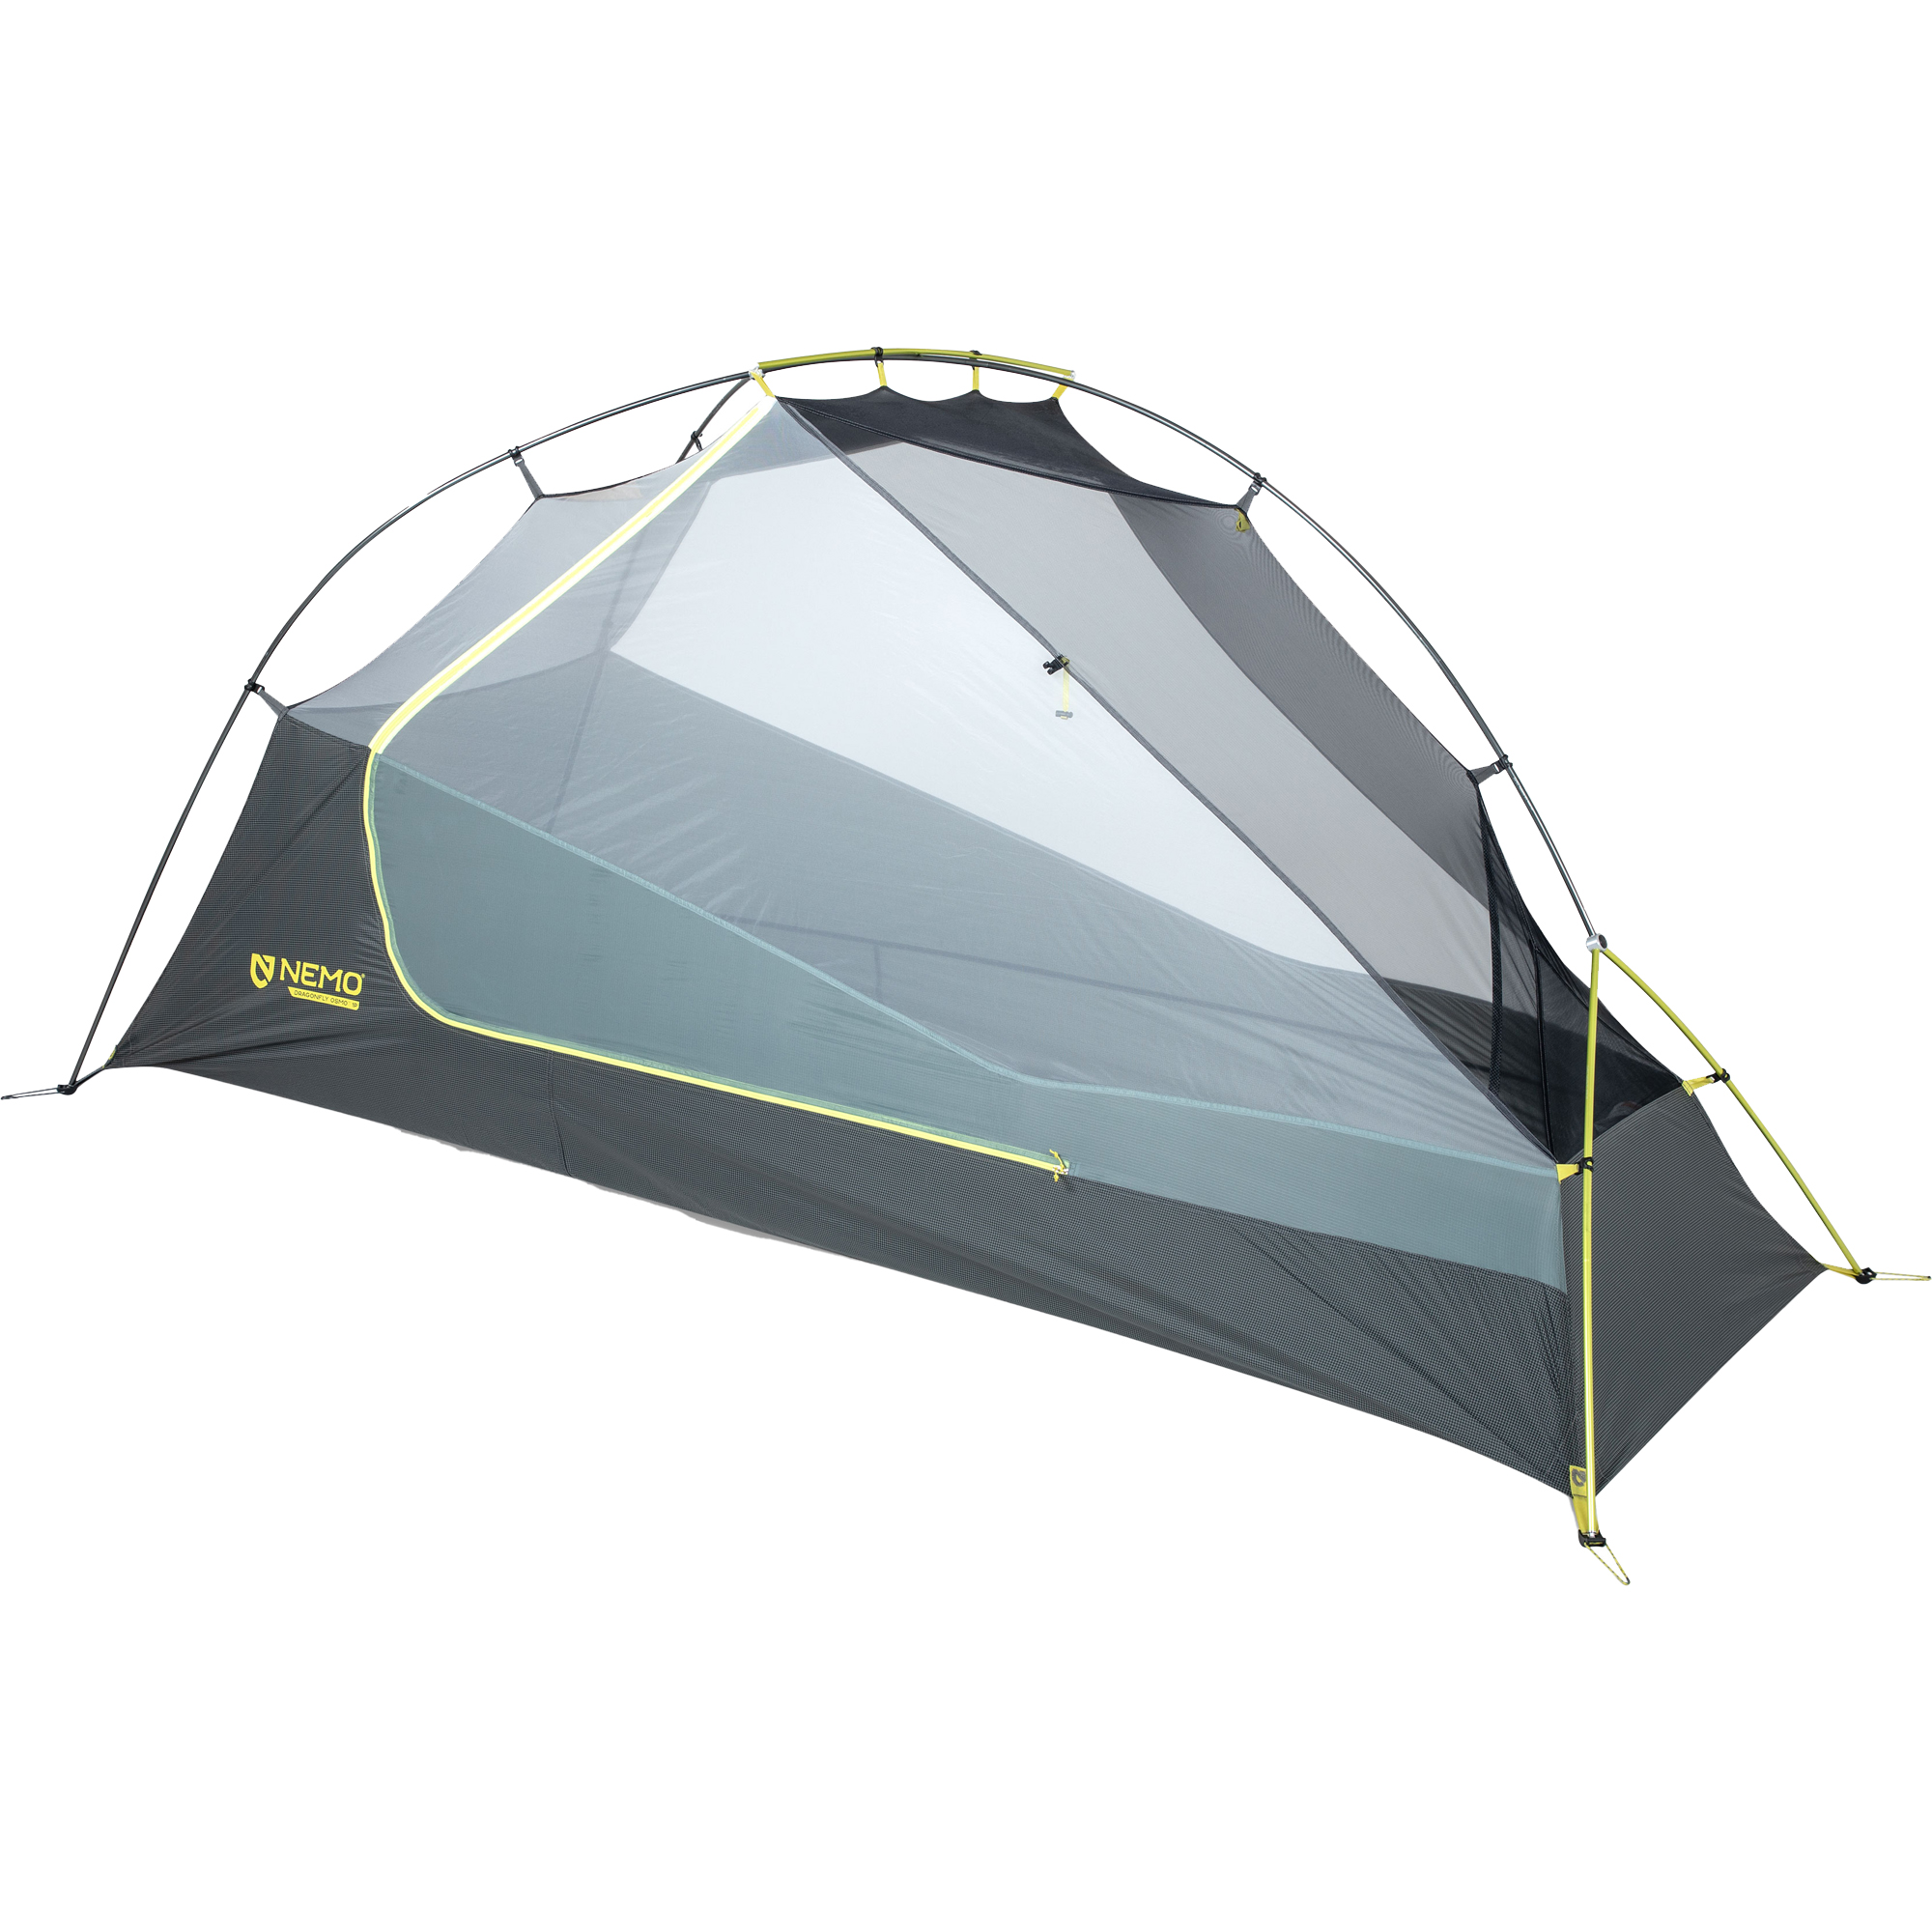 Nemo Dragonfly OSMO 1 Ultralight Backpacking Tent